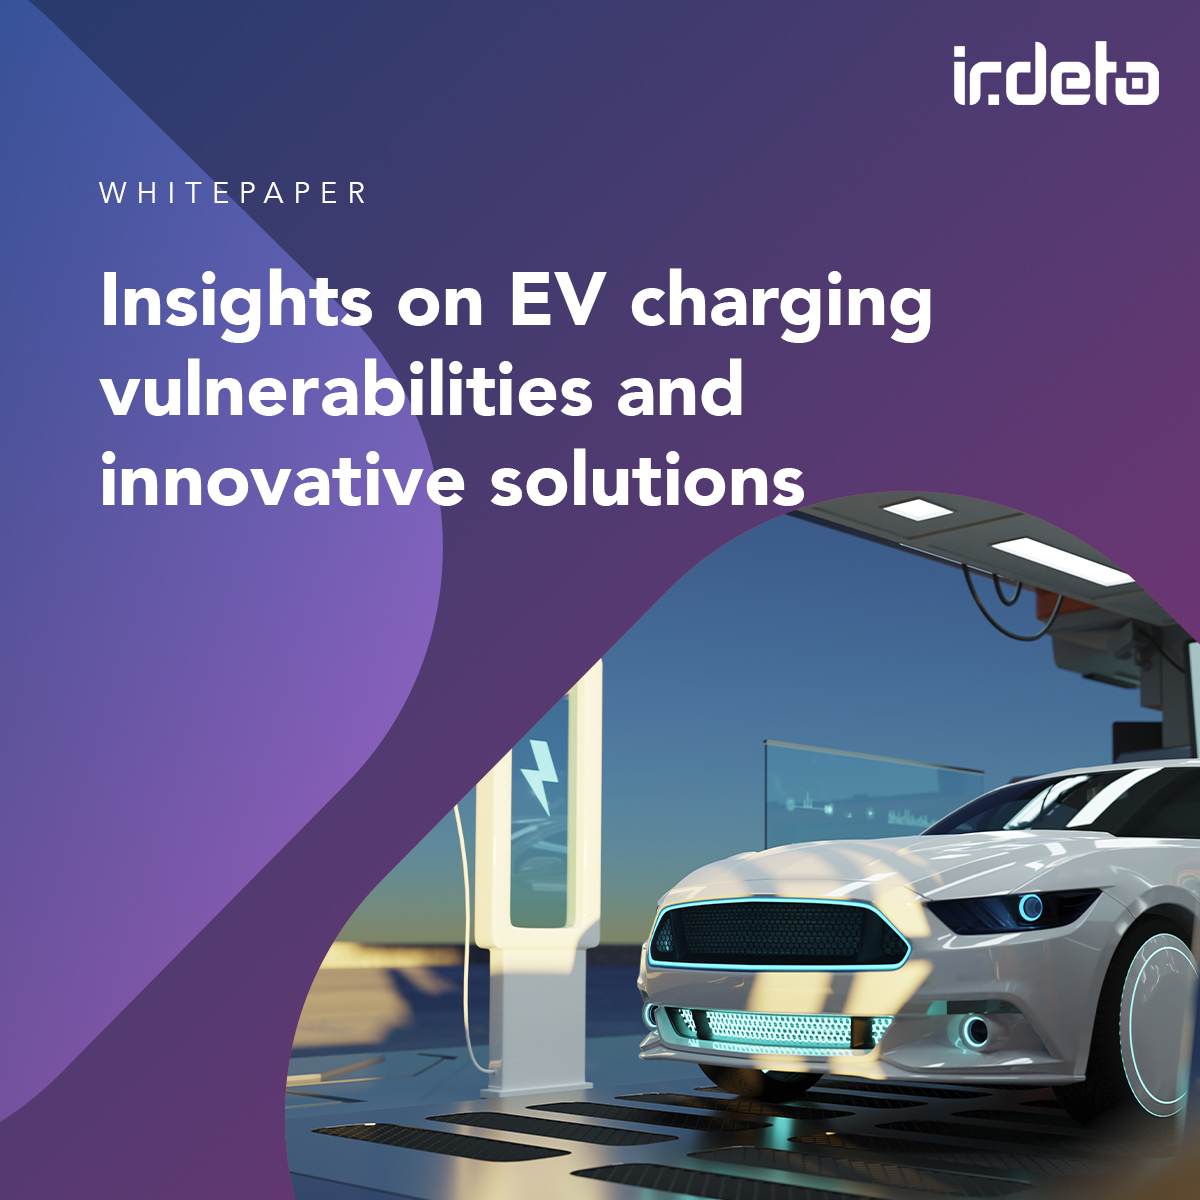 How are we keeping the system secure with millions of chargers connecting to the grid? Our whitepaper delves into #EVcharging #cybersecurity, exploring vulnerabilities, cutting-edge defenses and practical safeguards to ensure a secure road ahead. Read more irdeto.com/empowering-sec…